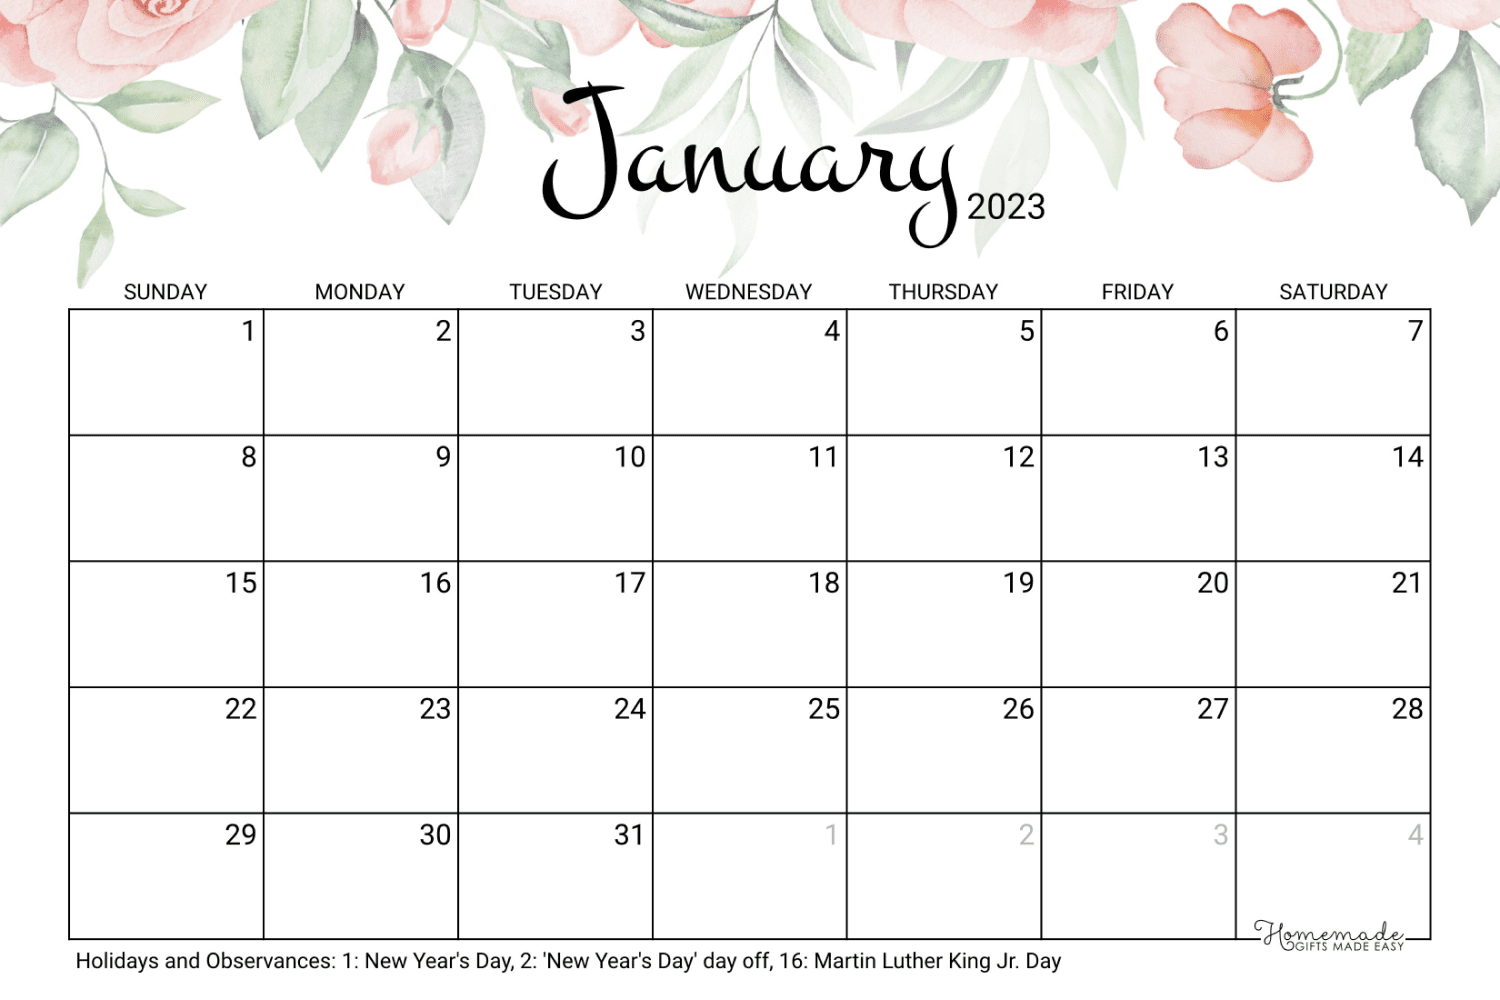 January calendar with white background, painted roses and holiday dates.